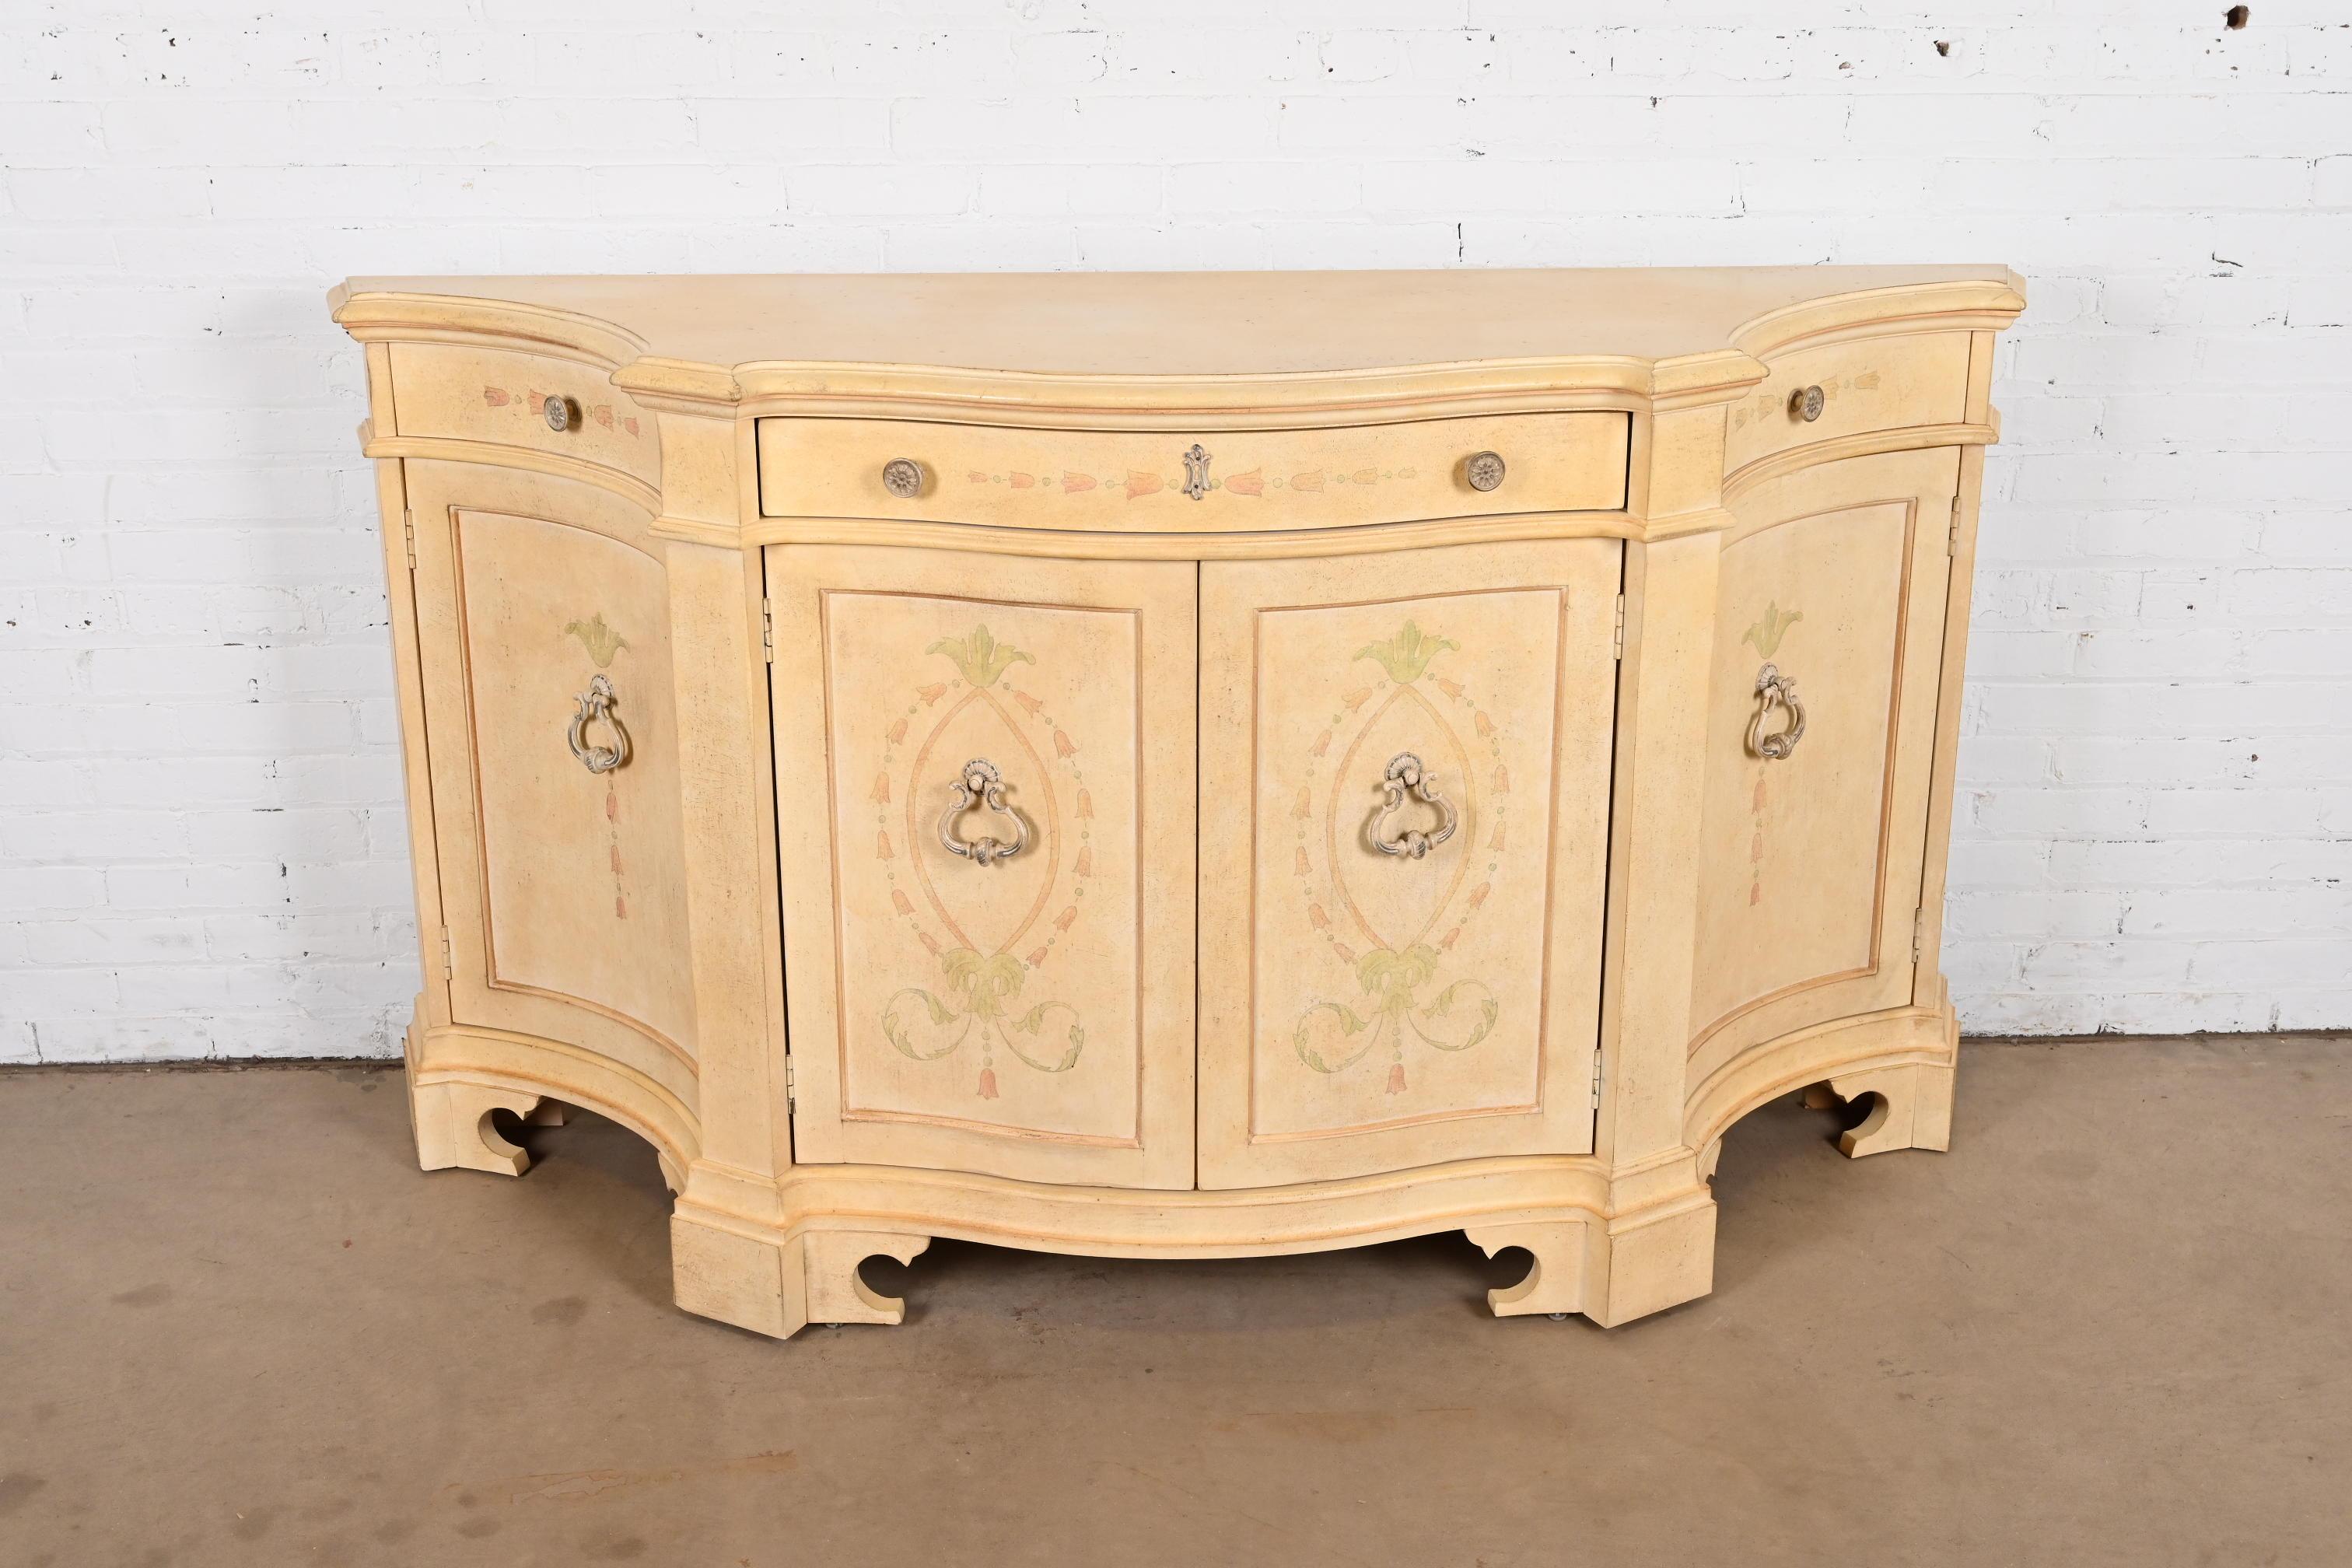 A gorgeous Italian Provincial Venetian style sideboard, credenza, or bar cabinet

By Century Furniture

USA, Circa 1980s

Carved painted walnut, with floral motif, and original hardware.

Measures: 72